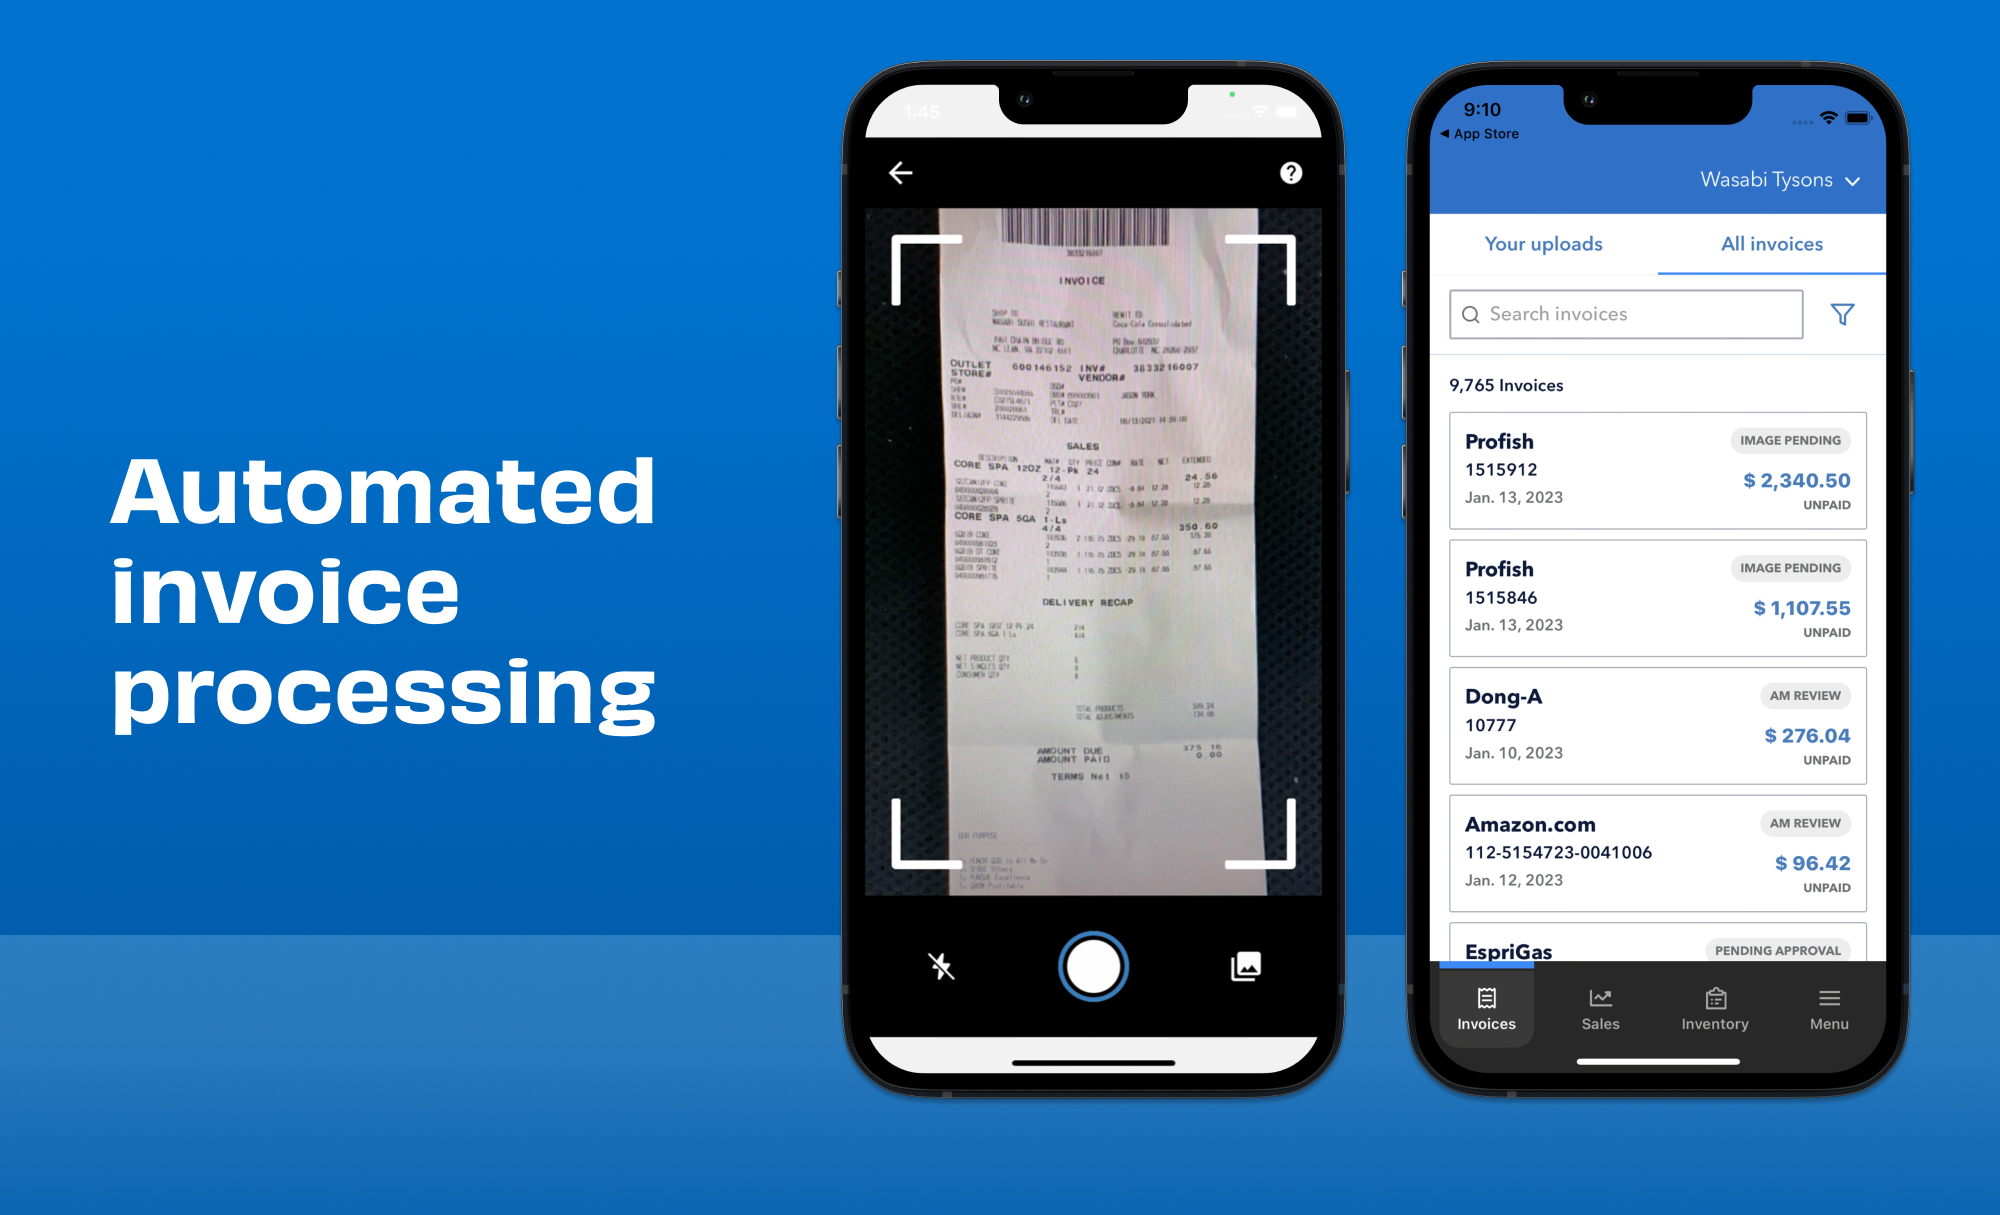 You send us your invoices, and we process them in 24-48 hours. No more spreadsheets. No more stacks of paper. No more manual entry! Save countless hours on admin work, so you can focus more time on the profit centers of your business.